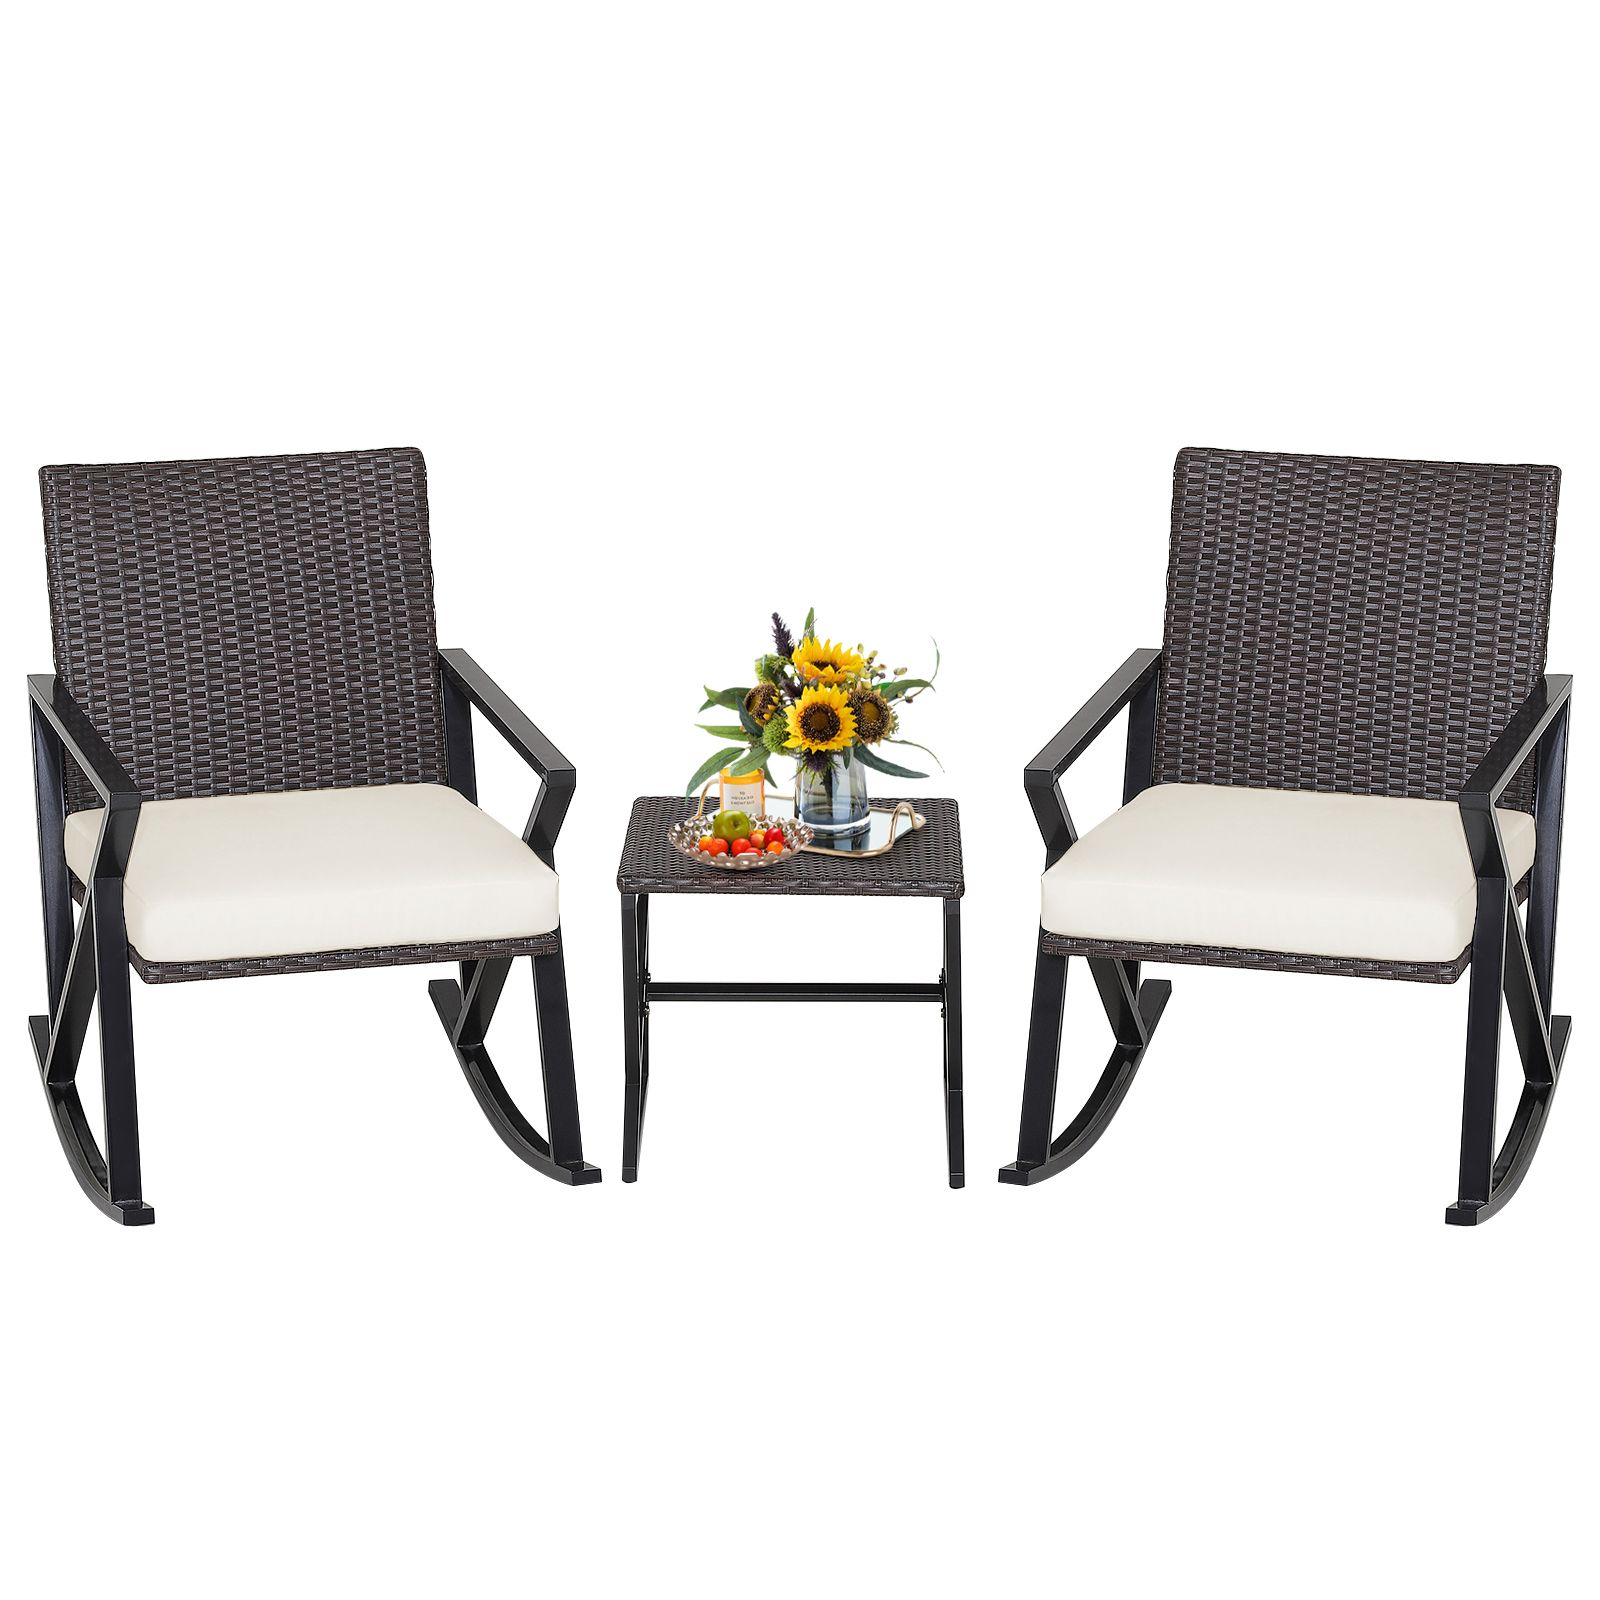 3 Pieces Rattan Patio Bistro Set with Rocking Chairs and Table